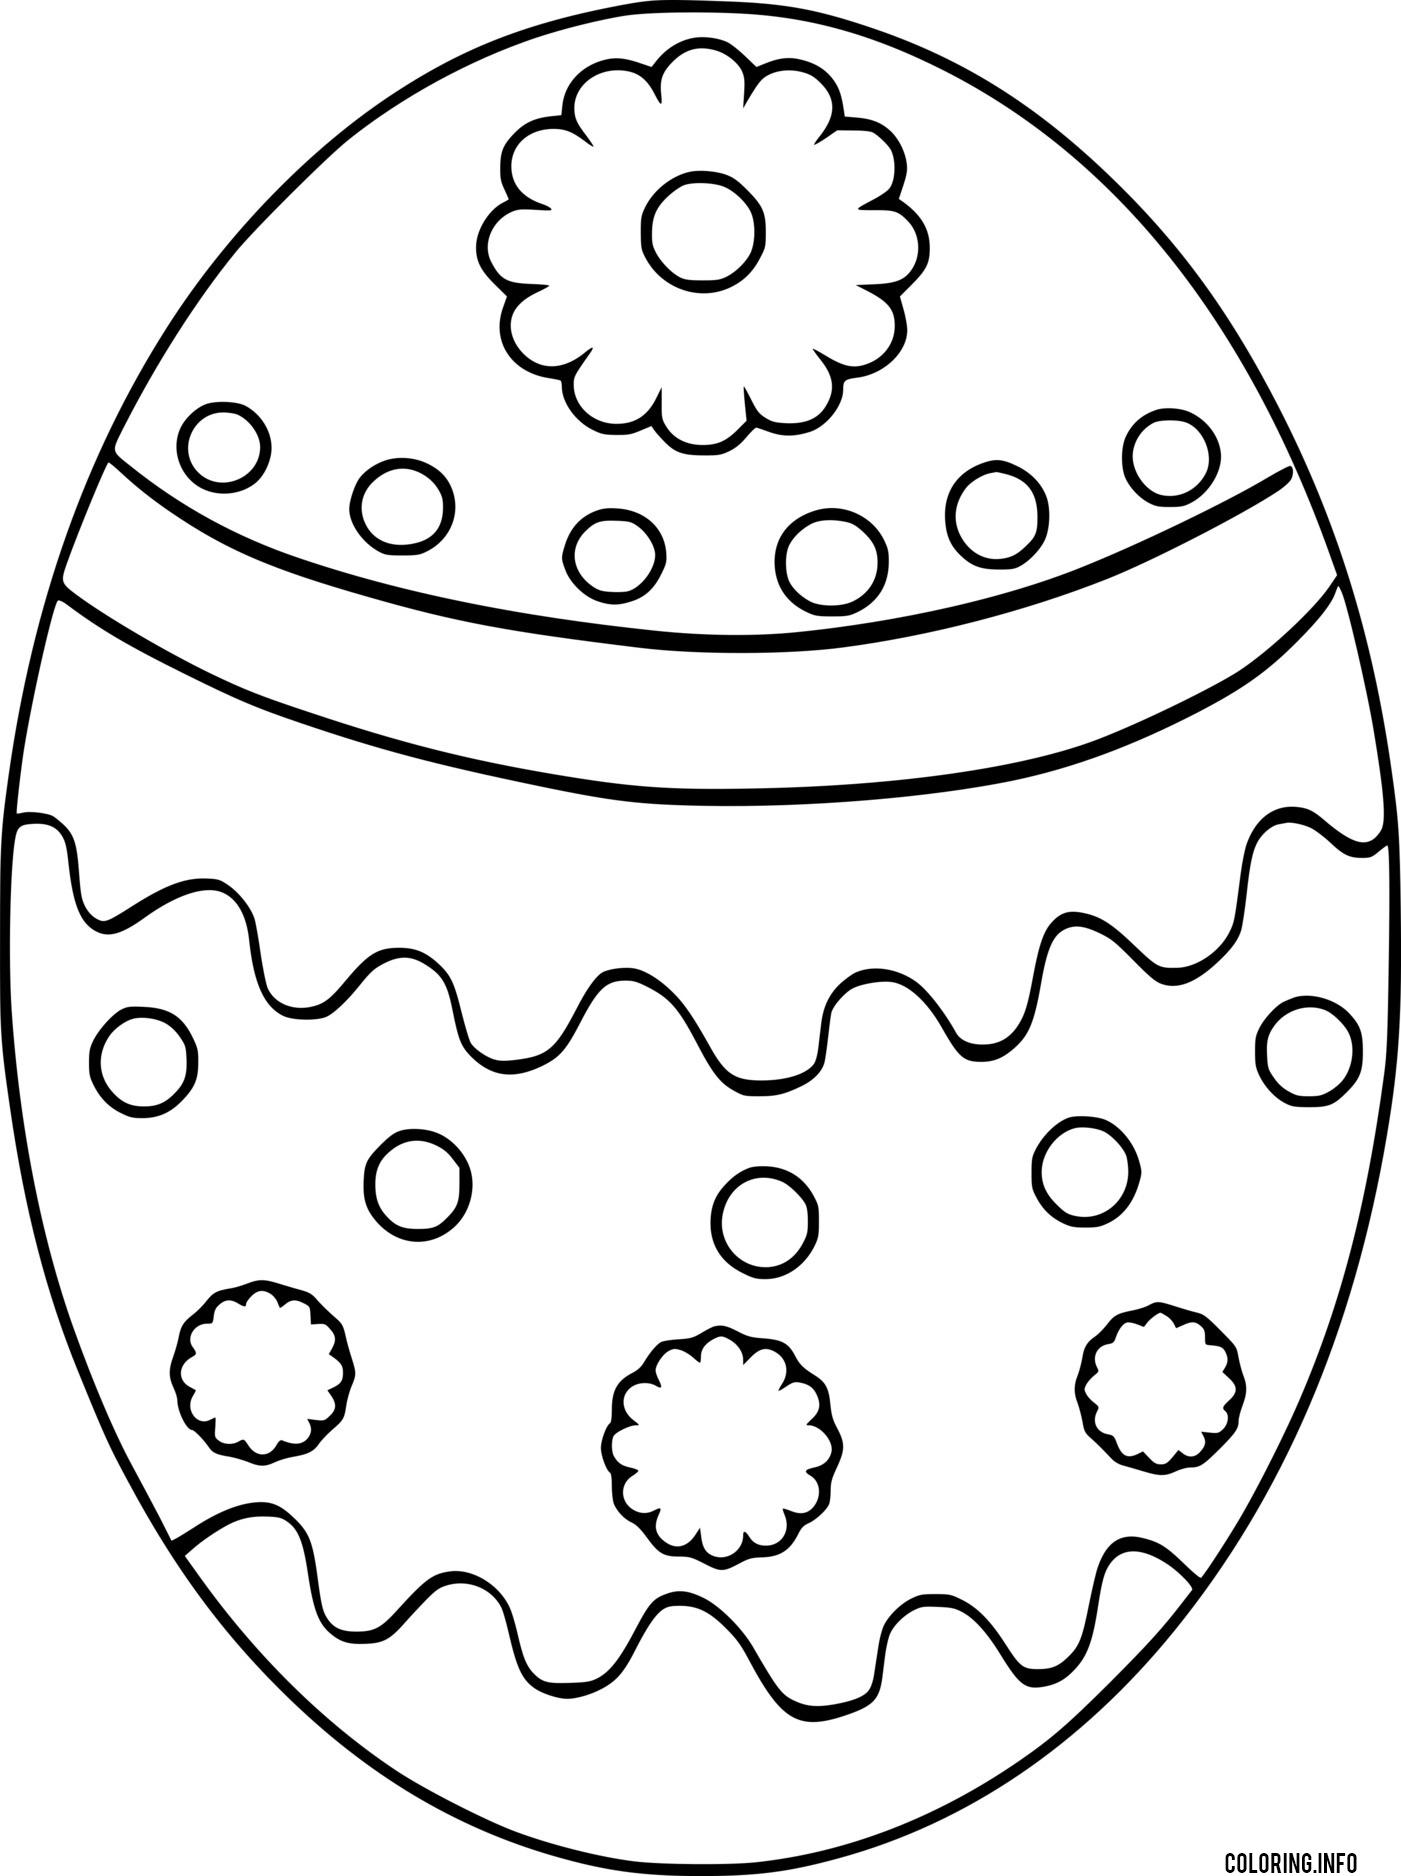 Easter Egg With Gear Patterns coloring